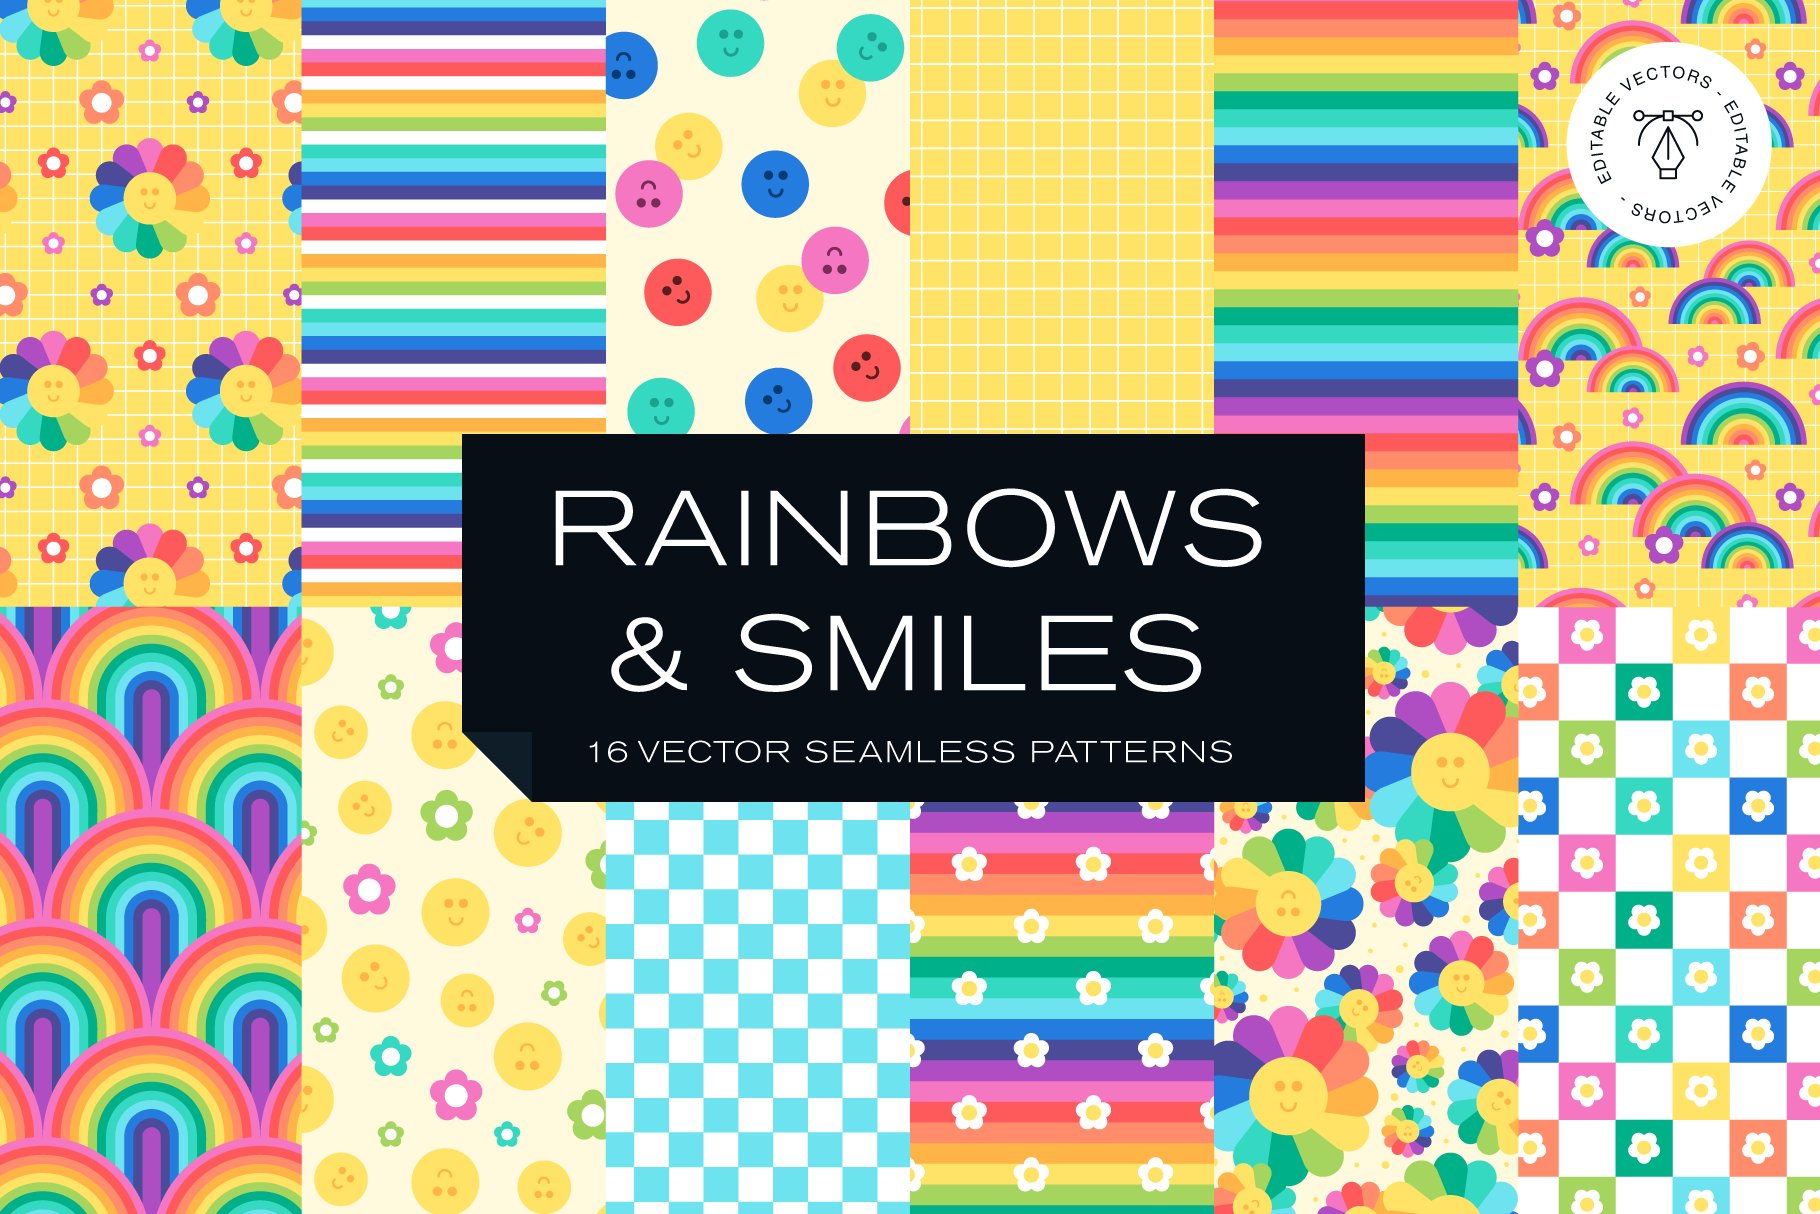 Rainbows & Smiles Pattern Collection cover image.